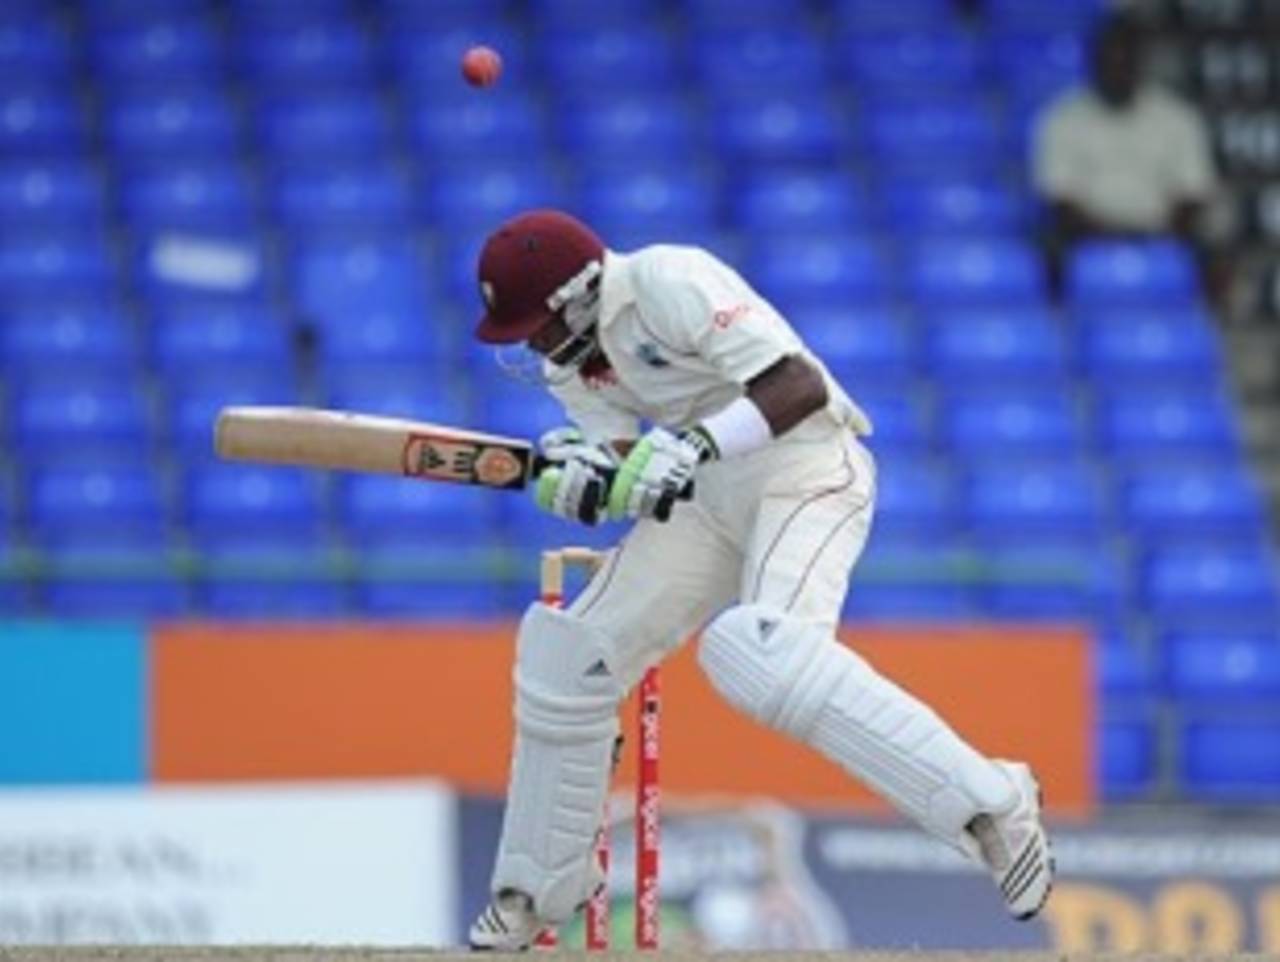 Dwayne Bravo ducks under a bouncer, West Indies v South Africa, 2nd Test, St Kitts, 4th day, June 20, 2010